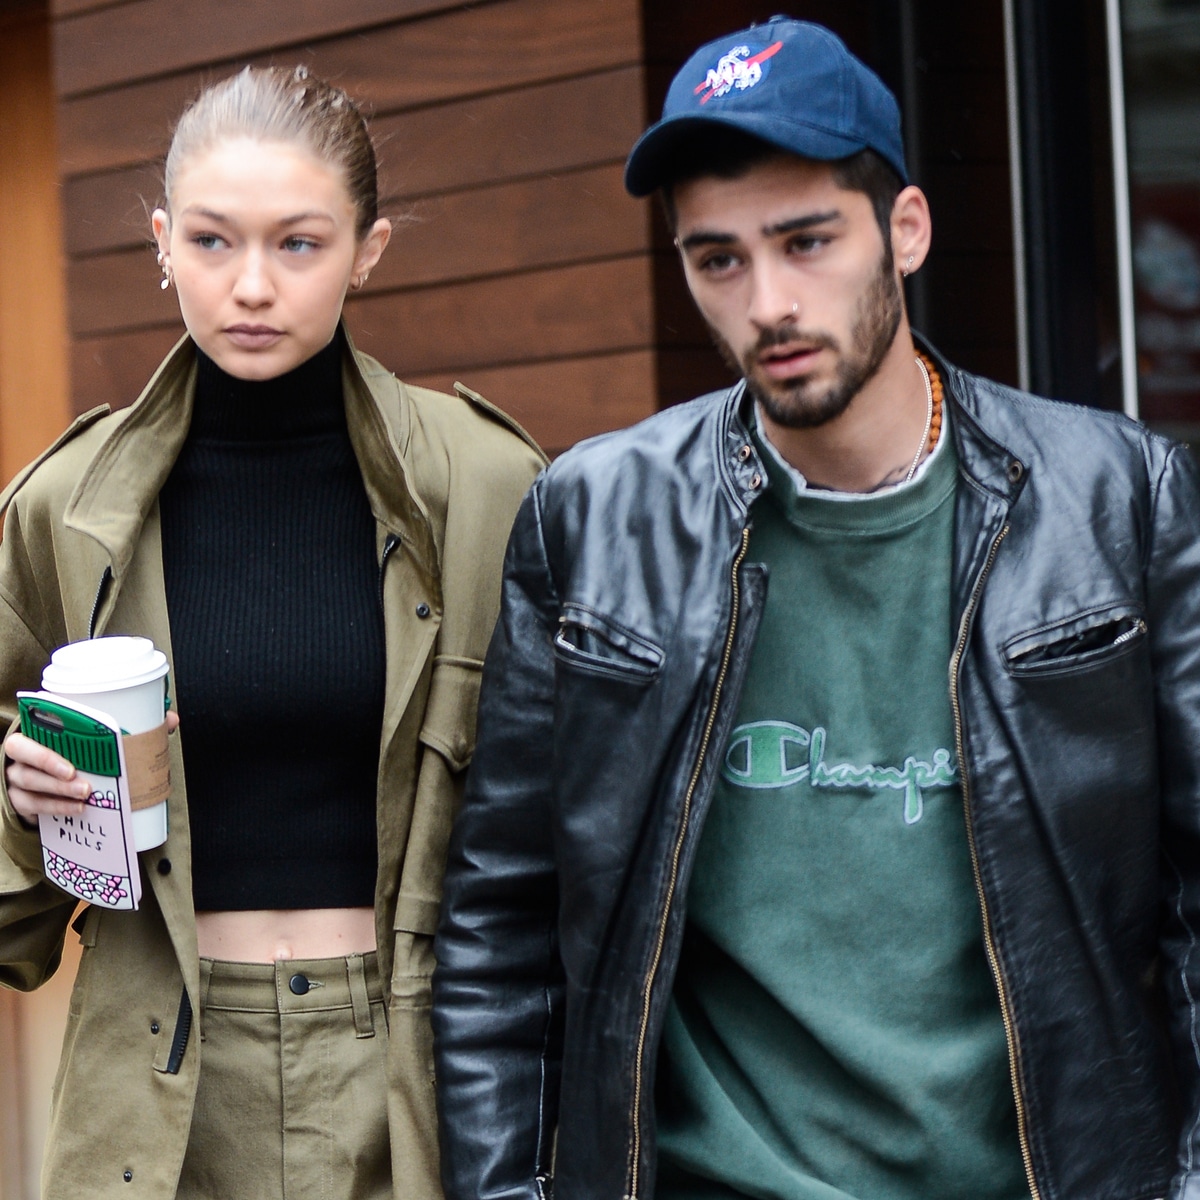 How Gigi Hadid Describes Her Approach to Co-Parenting With Zayn Malik